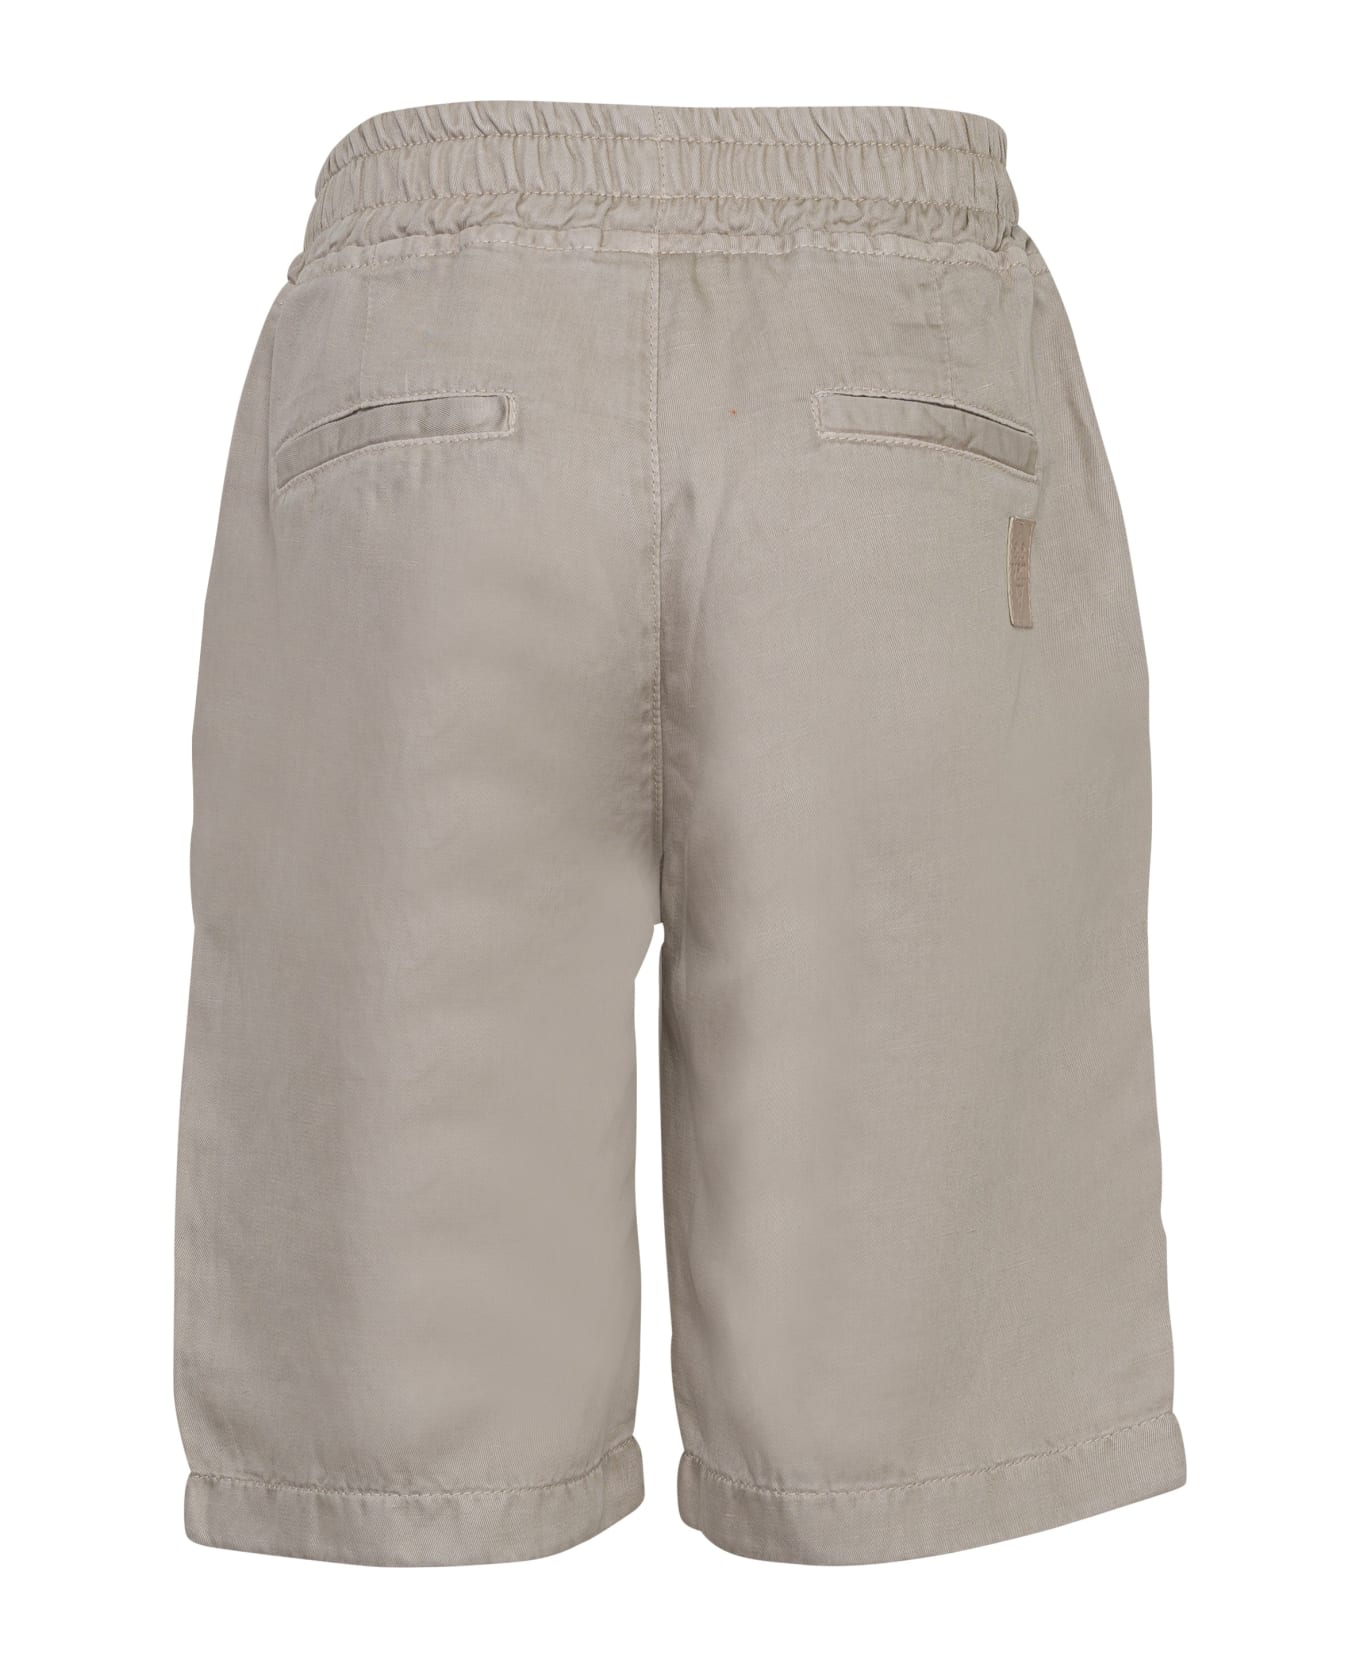 Eleventy Cargo Shorts With Application - Gray ボトムス